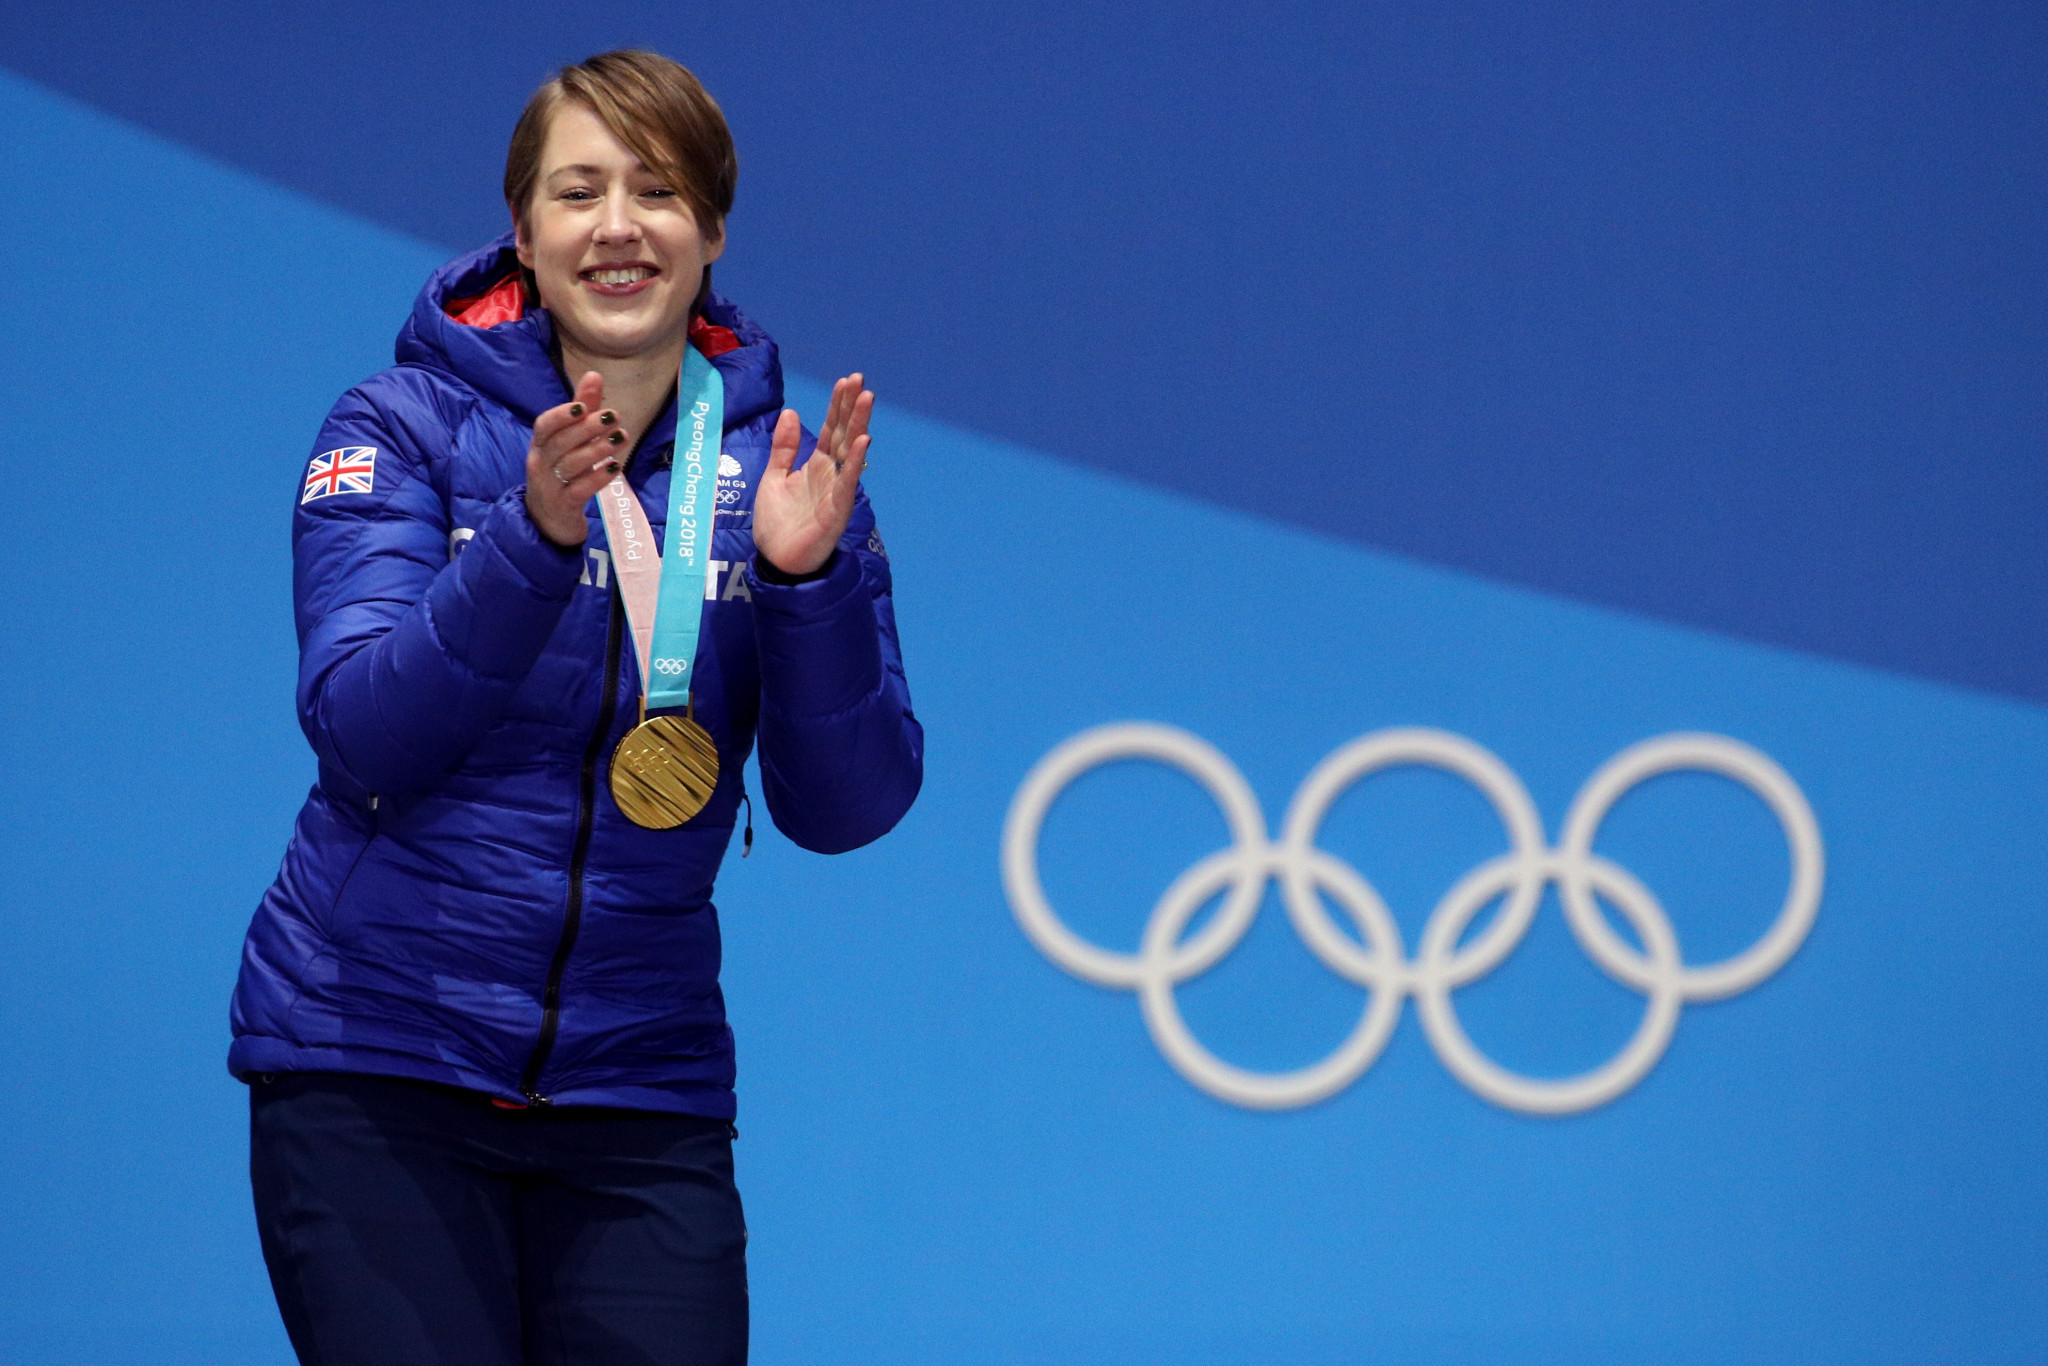 Lizzy Yarnold's two Olympic gold medals came during Christopher Rodrigues' tenure as chair ©Getty Images